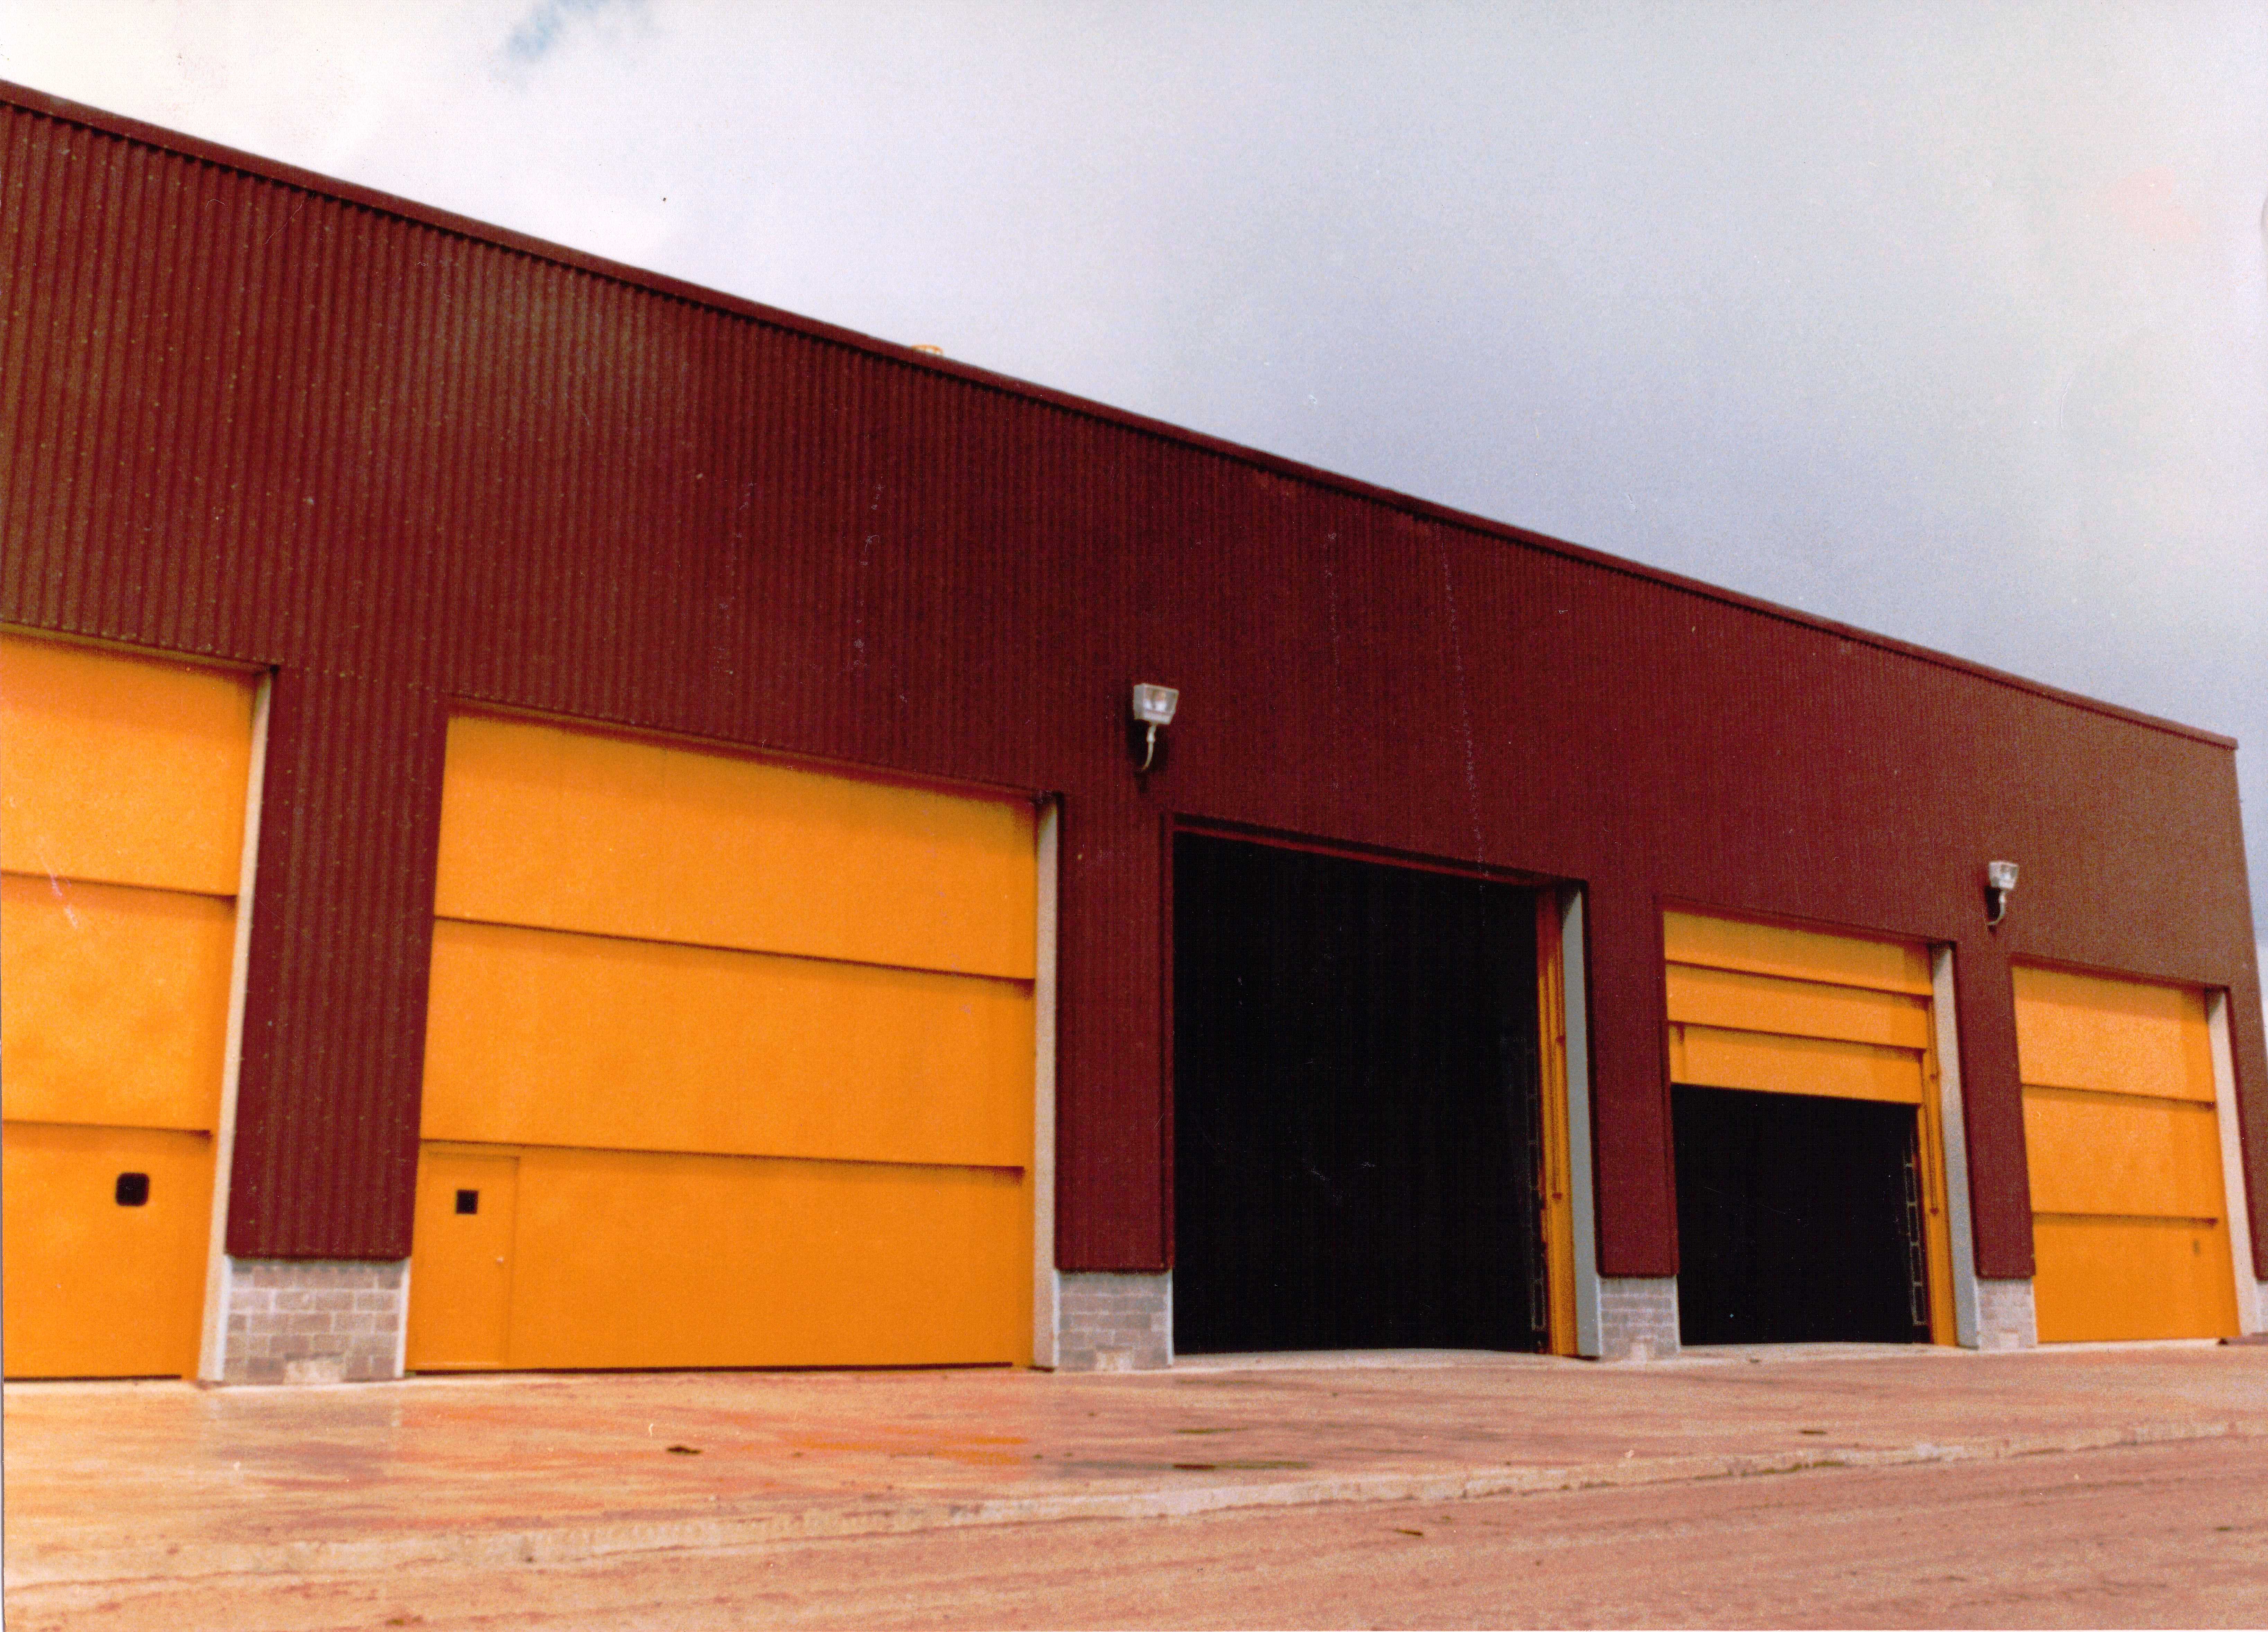 Vertical Lift Doors with Mandoor on the Truck Shop on a Taconite in Hibbing, MN